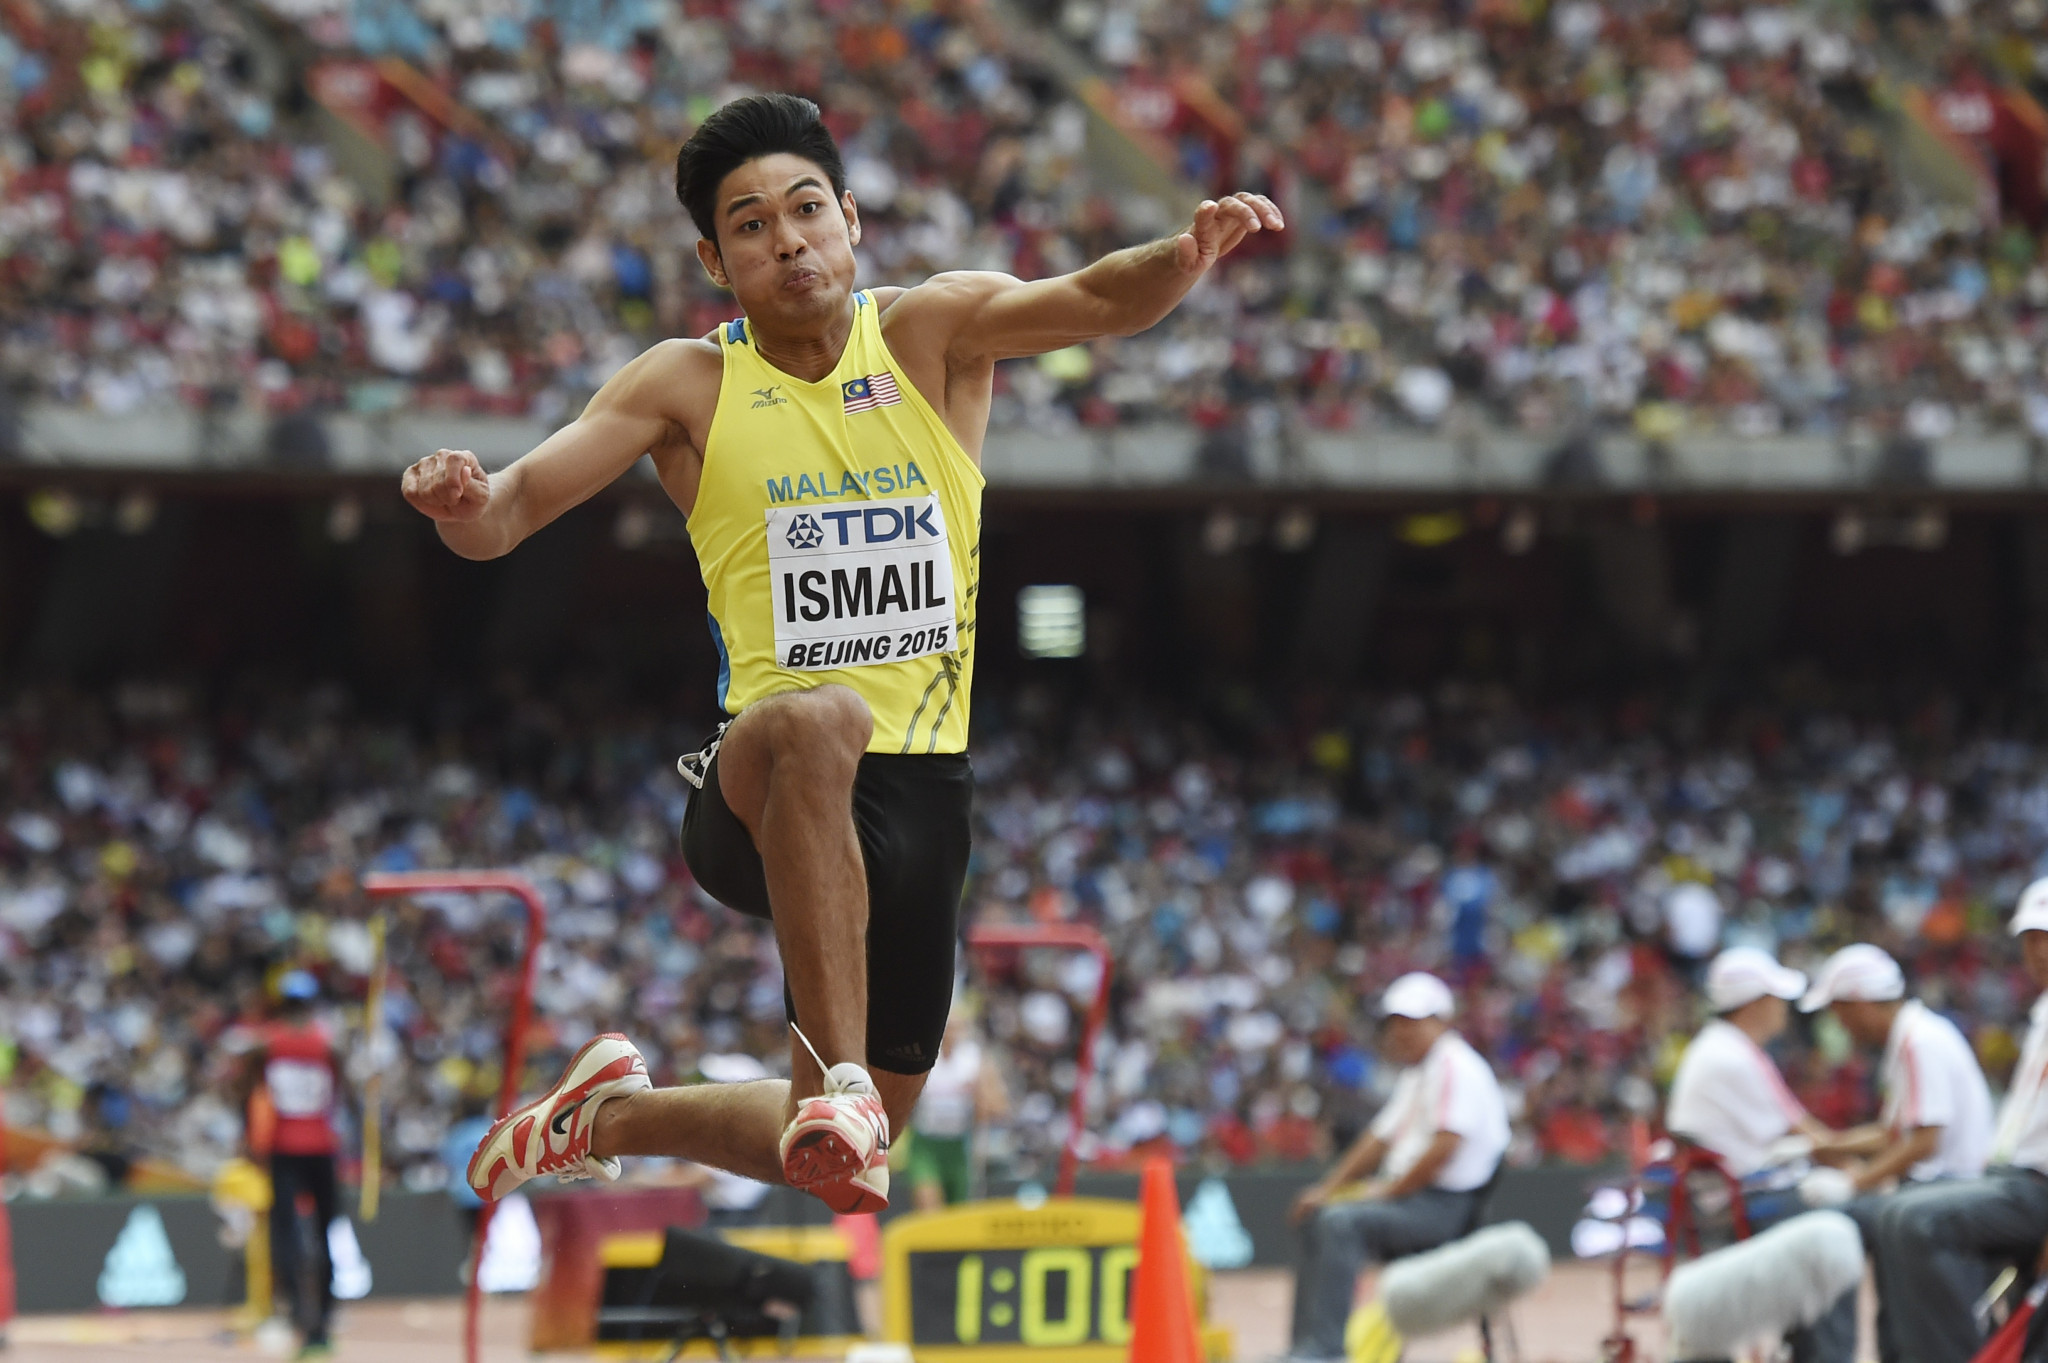 Triple jumper Muhd Hakimi Ismail is set to carry Malaysia's flag in the Opening Ceremony ©Getty Images